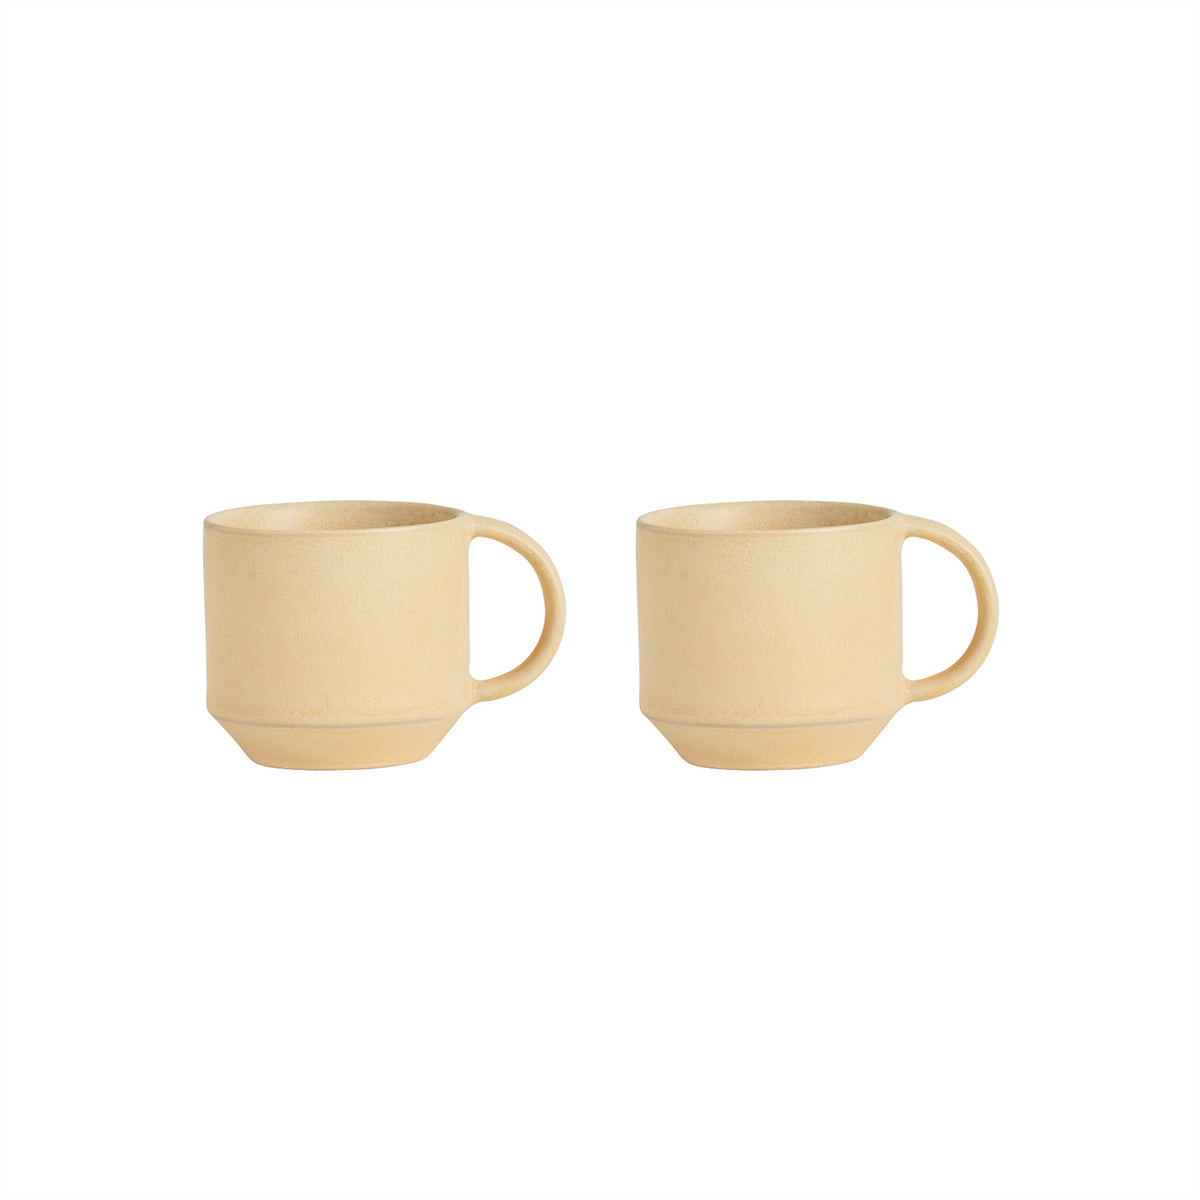 OYOY LIVING Yuka Espresso Cup - Pack of 2 Cup 806 Butter